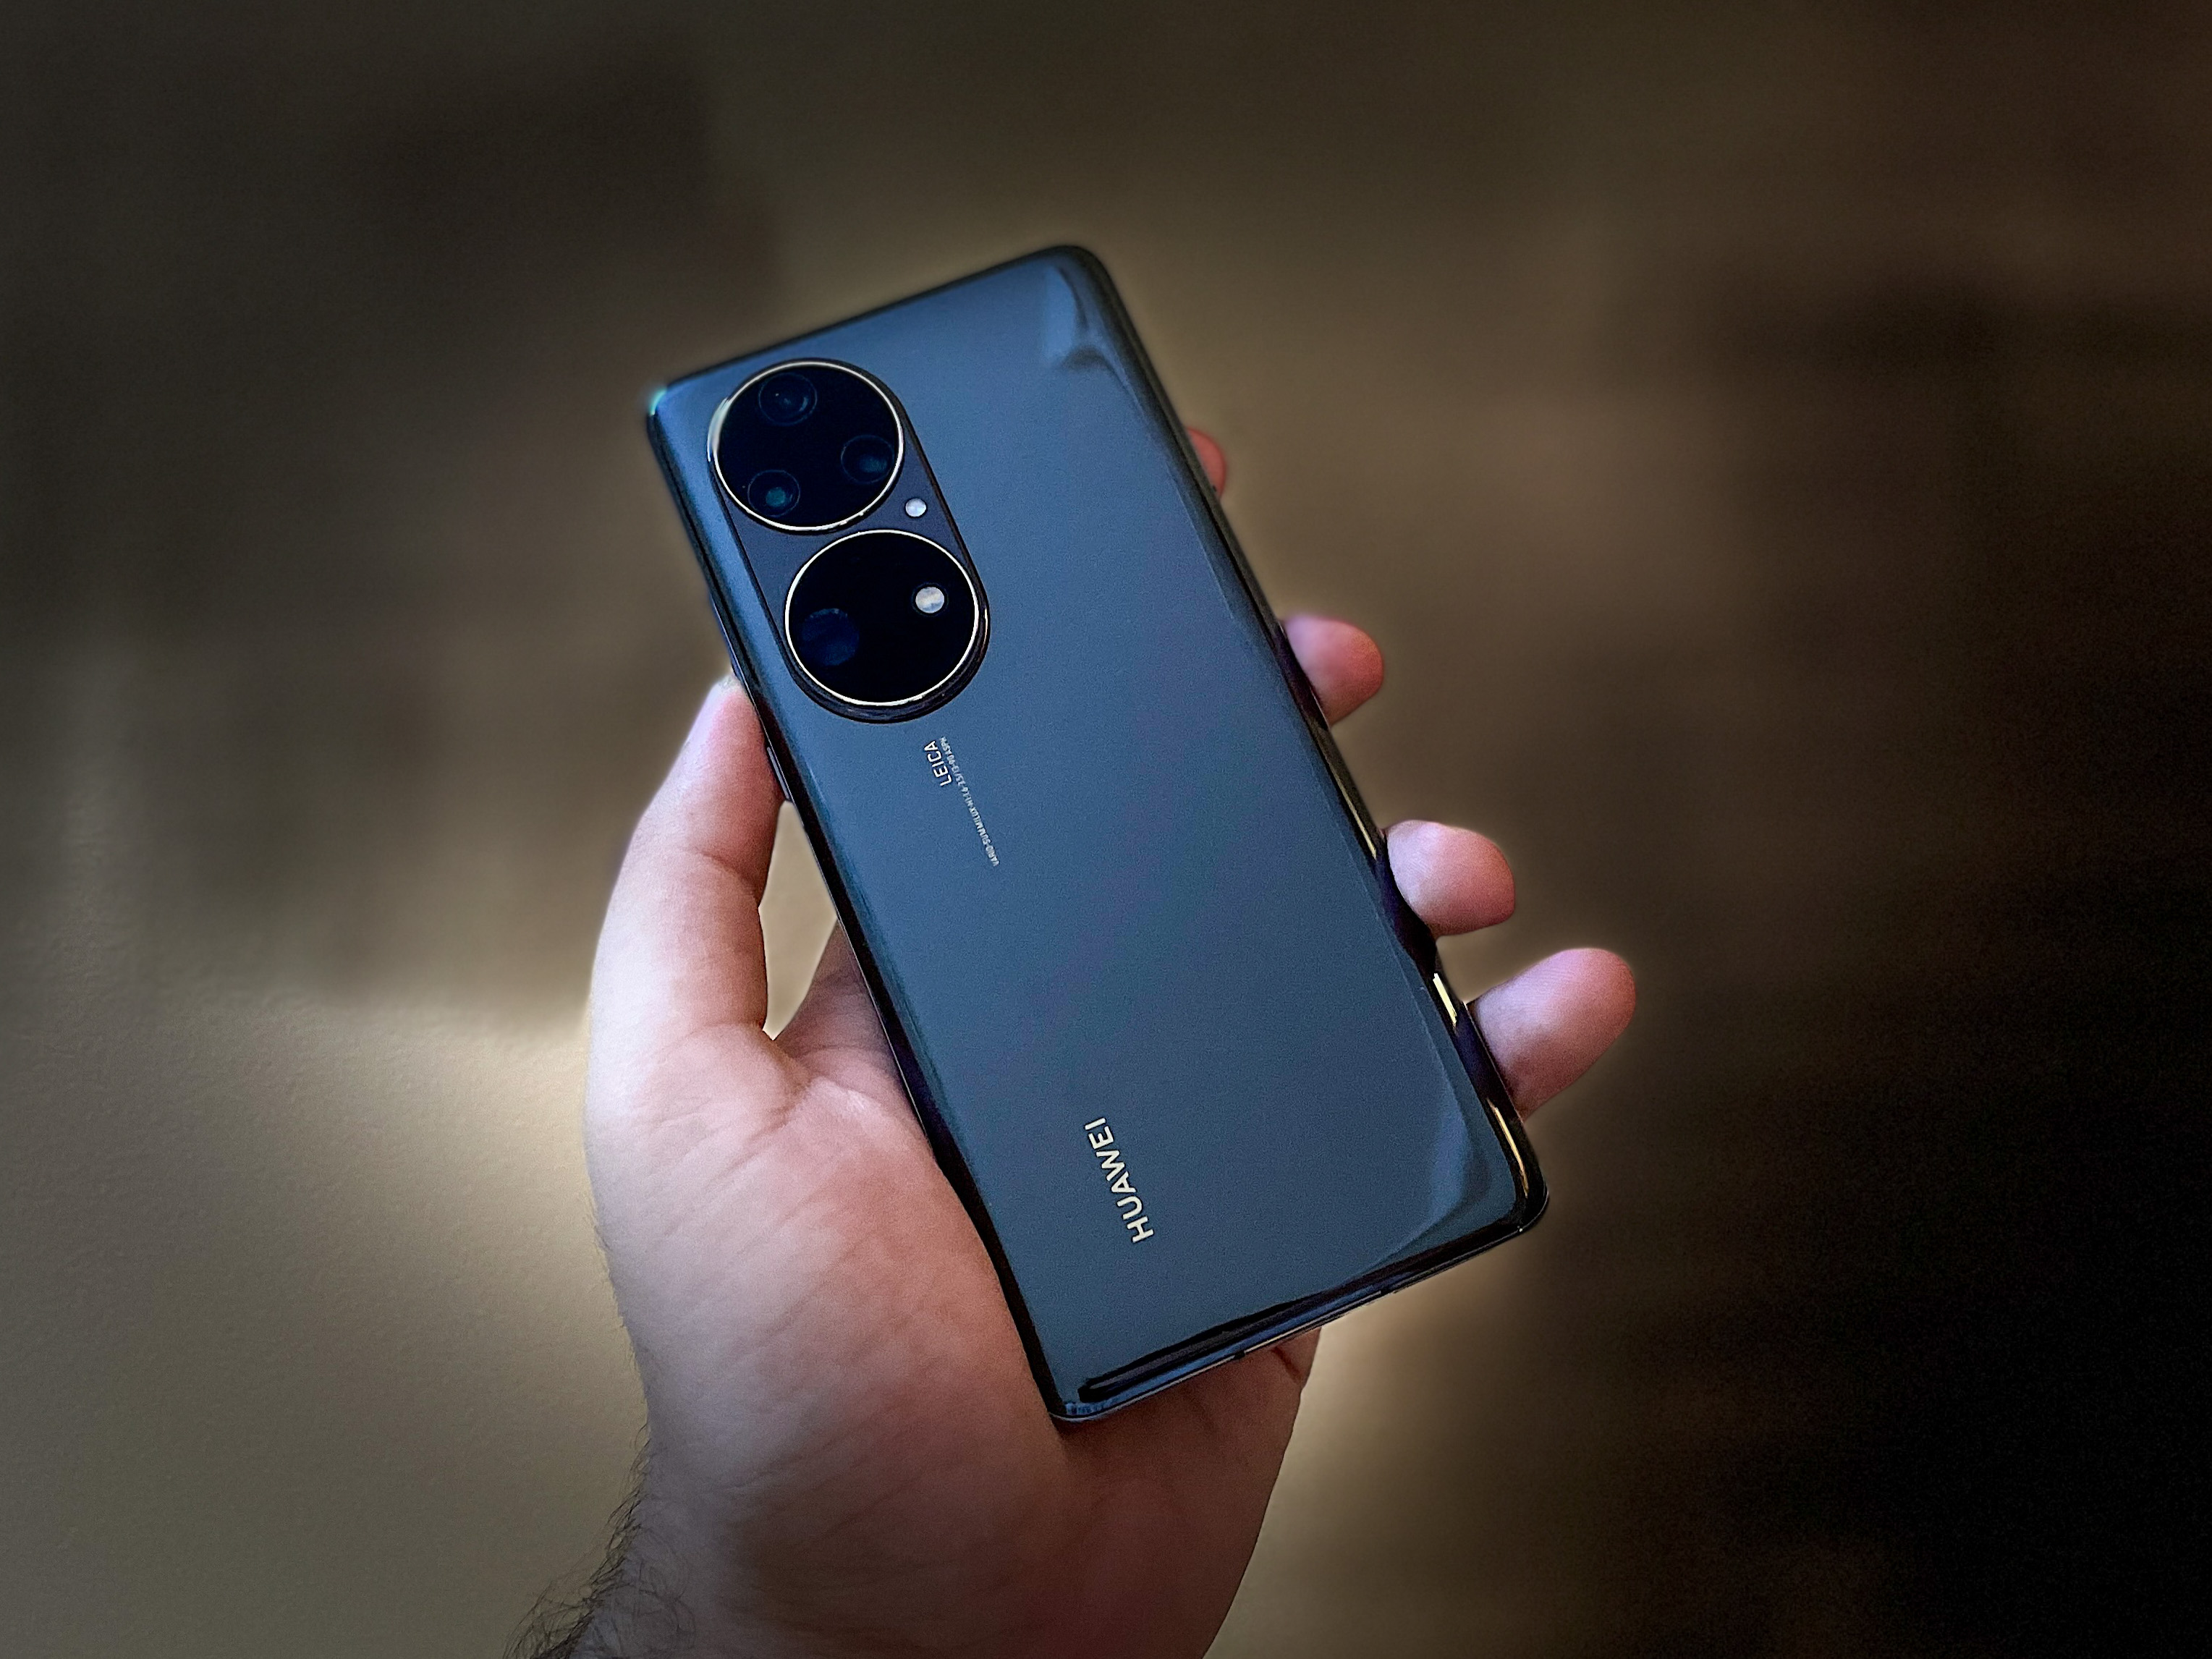 Here's the first image of the upcoming Huawei P50 Pro 